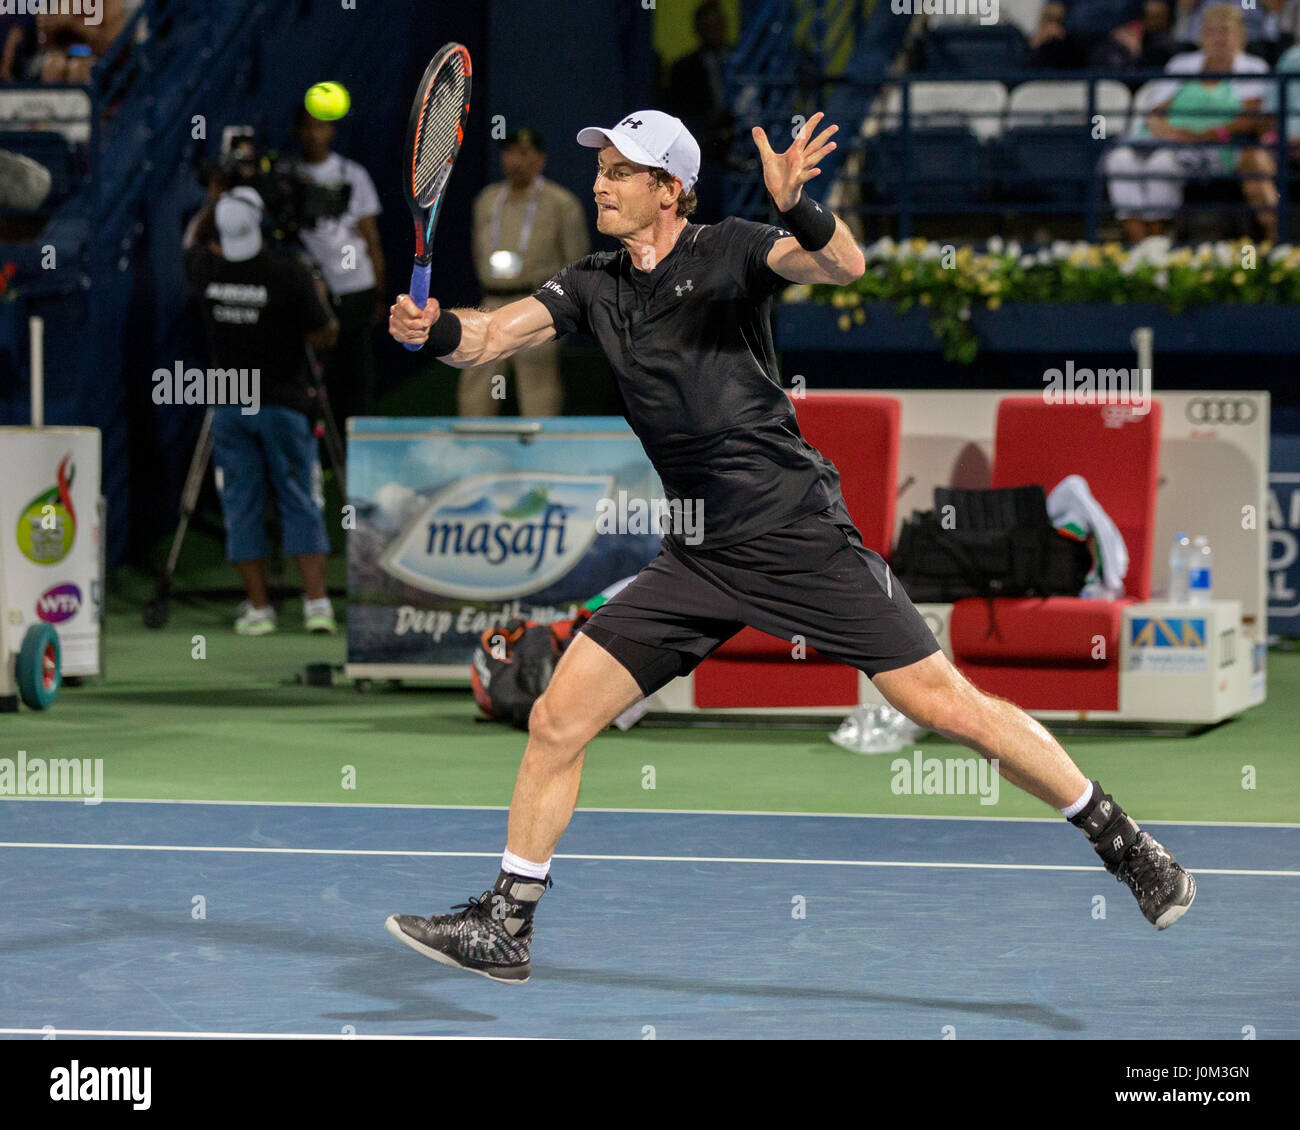 ANDY MURRAY (GBR) in Aktion Stockfoto